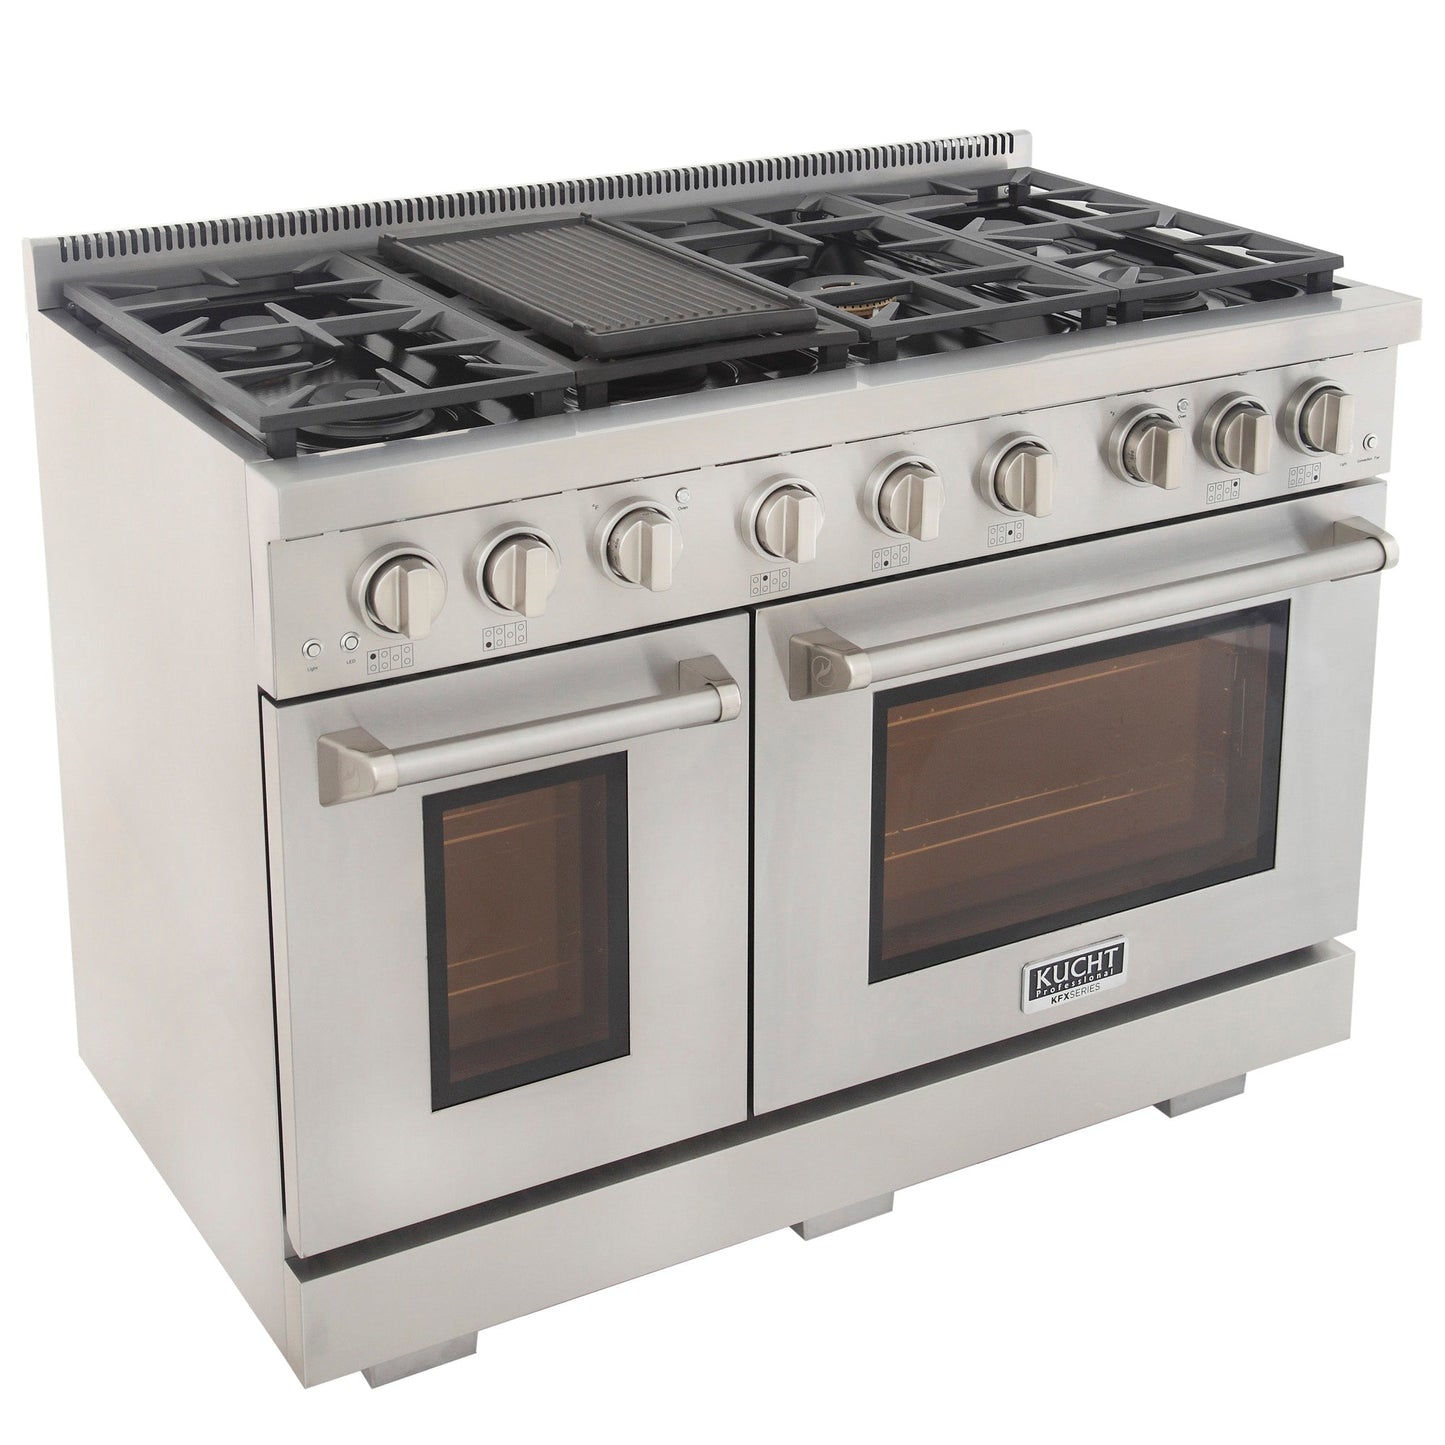 Kucht KFX Series 48" Freestanding Propane Gas Range With 7 Burners and Classic Silver Knobs